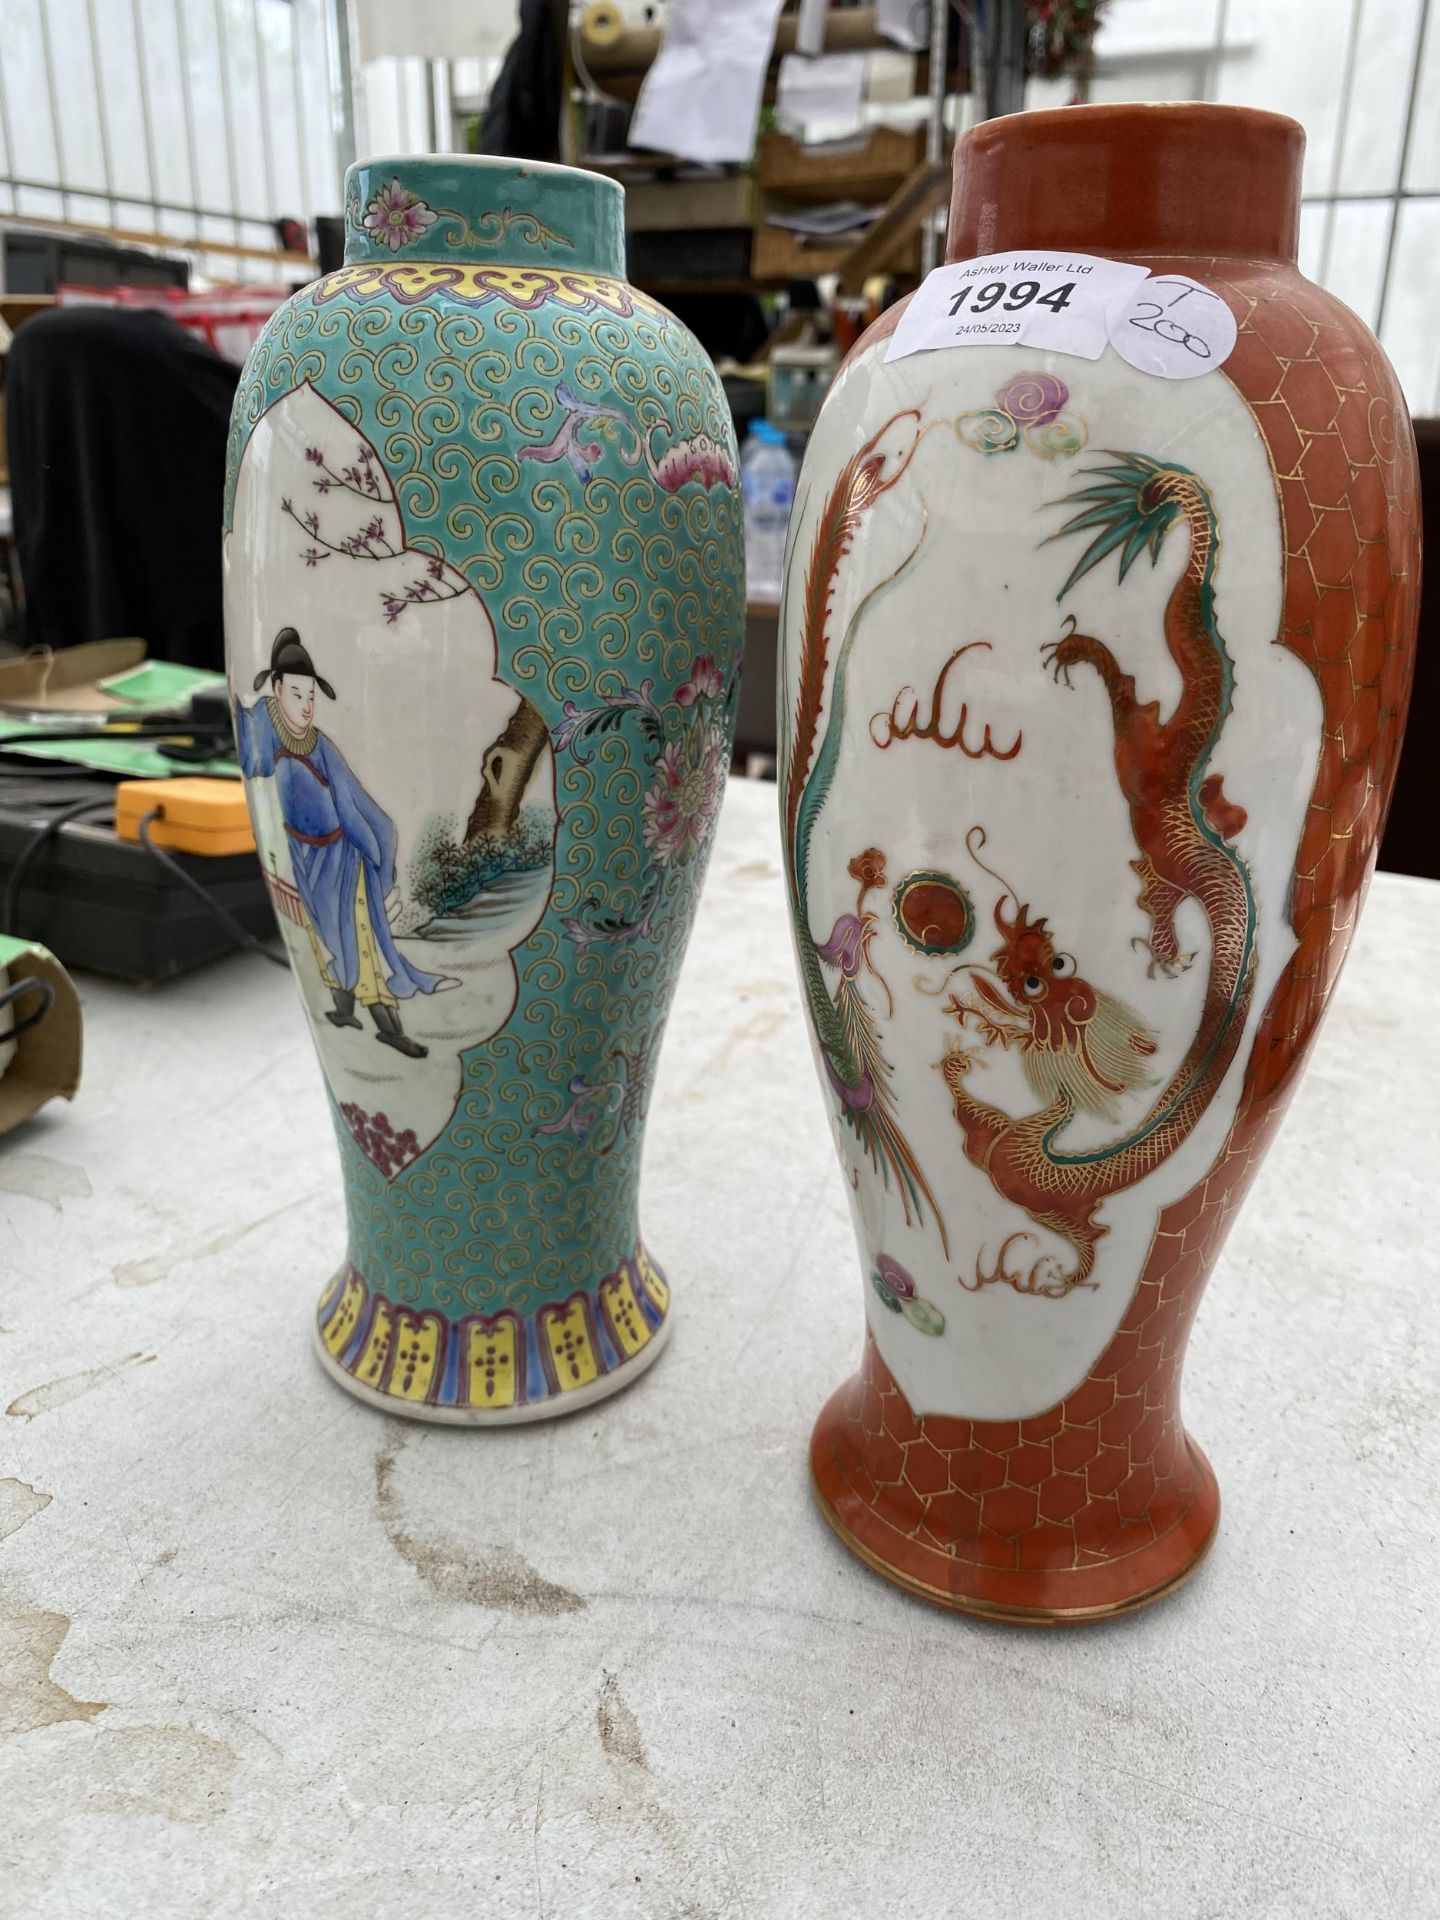 TWO CHINESE VASES - BOTH REPUBLIC PERIOD OR LATER, ONE DECORATED WITH DRAGONS AND THE OTHER WITH - Image 2 of 5